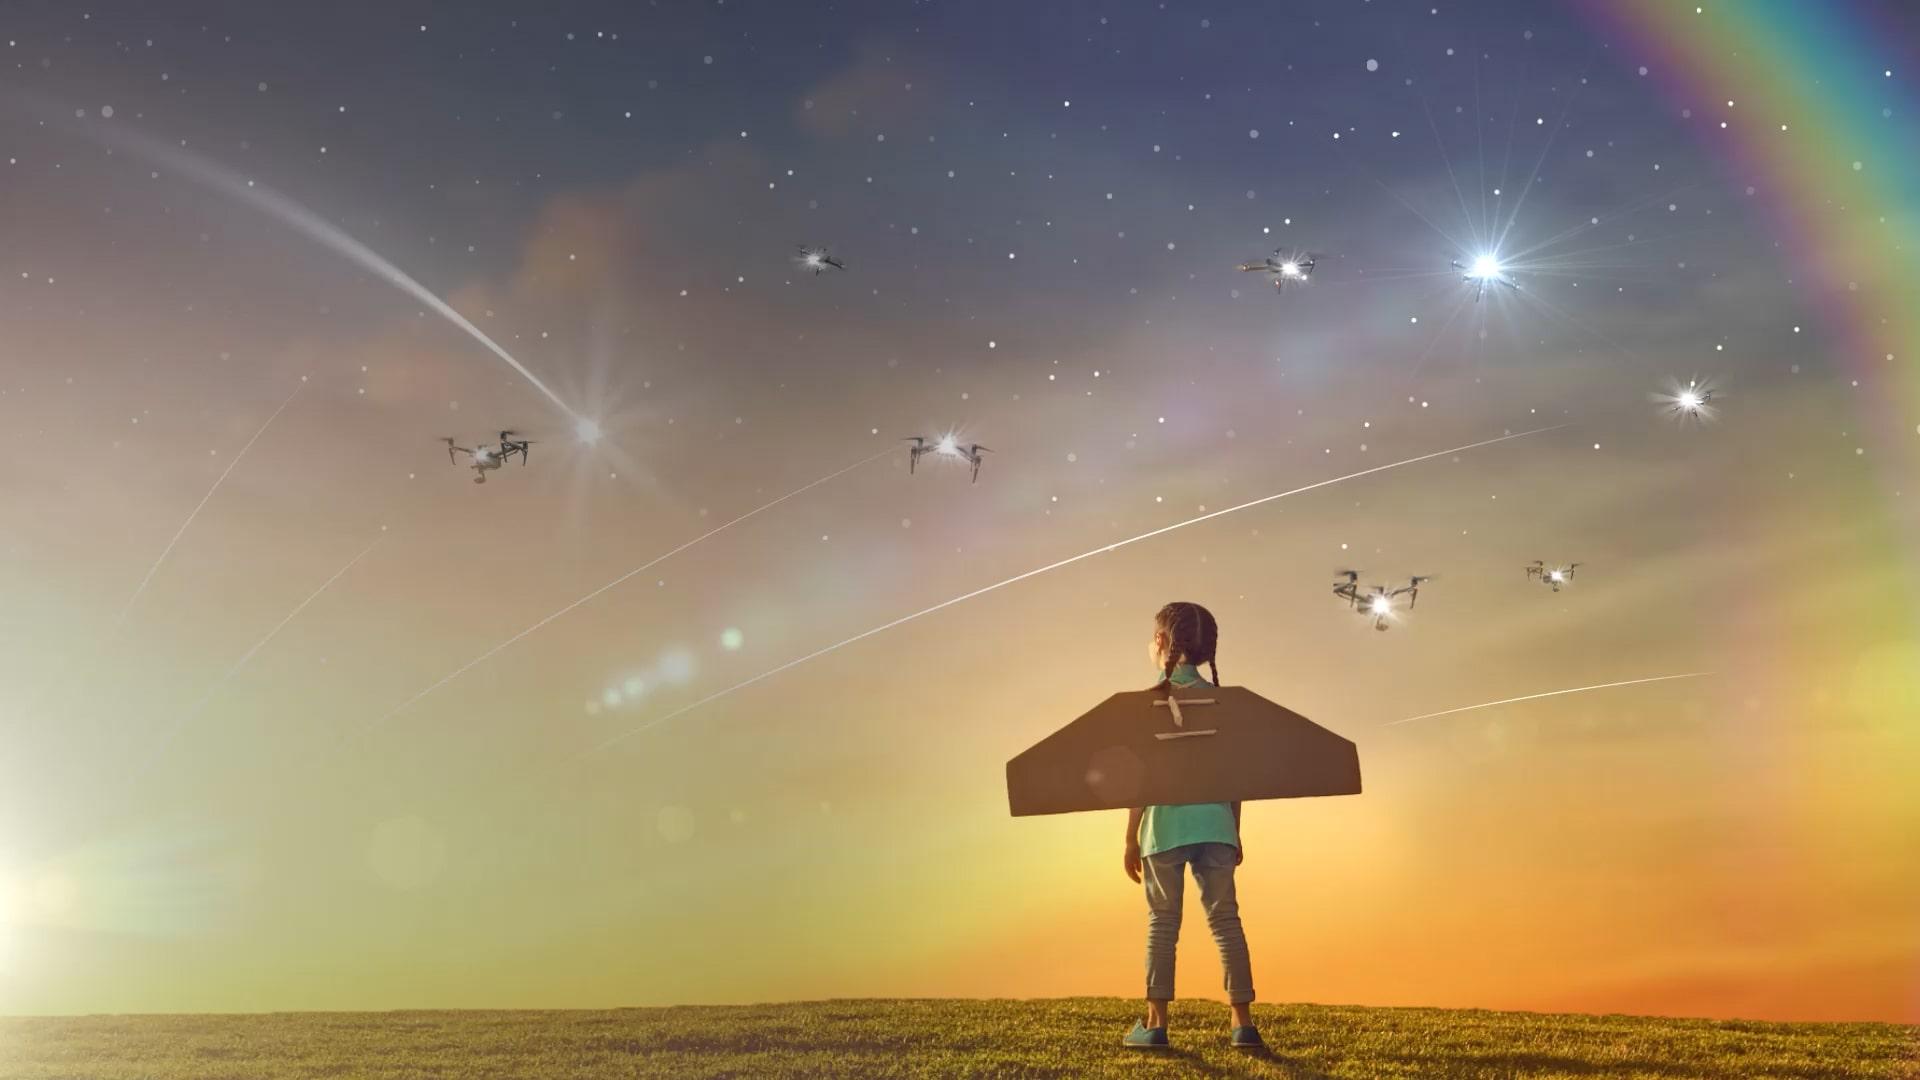 Several drones flying over the starry sky and a costumed child with wings on his back looking at the sky.